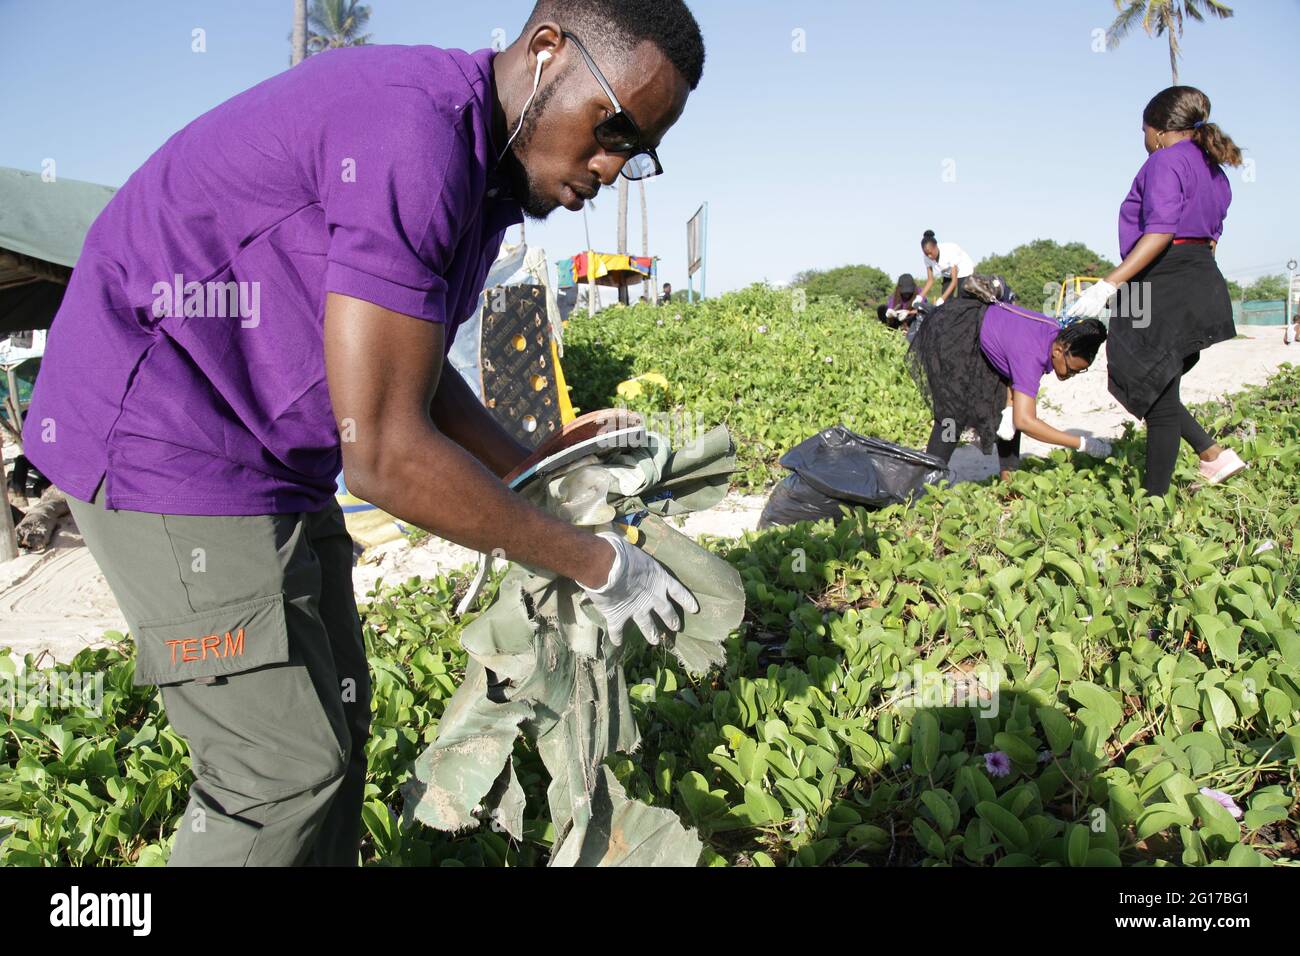 Dar Es Salaam, Tanzania. 5th June, 2021. Volunteers pick up garbage during an event marking the World Environment Day at a beach in Dar es Salaam, Tanzania, June 5, 2021. Saturday marks this year's World Environment Day with the theme of 'Ecosystem Restoration'. Credit: Herman Emmanuel/Xinhua/Alamy Live News Stock Photo